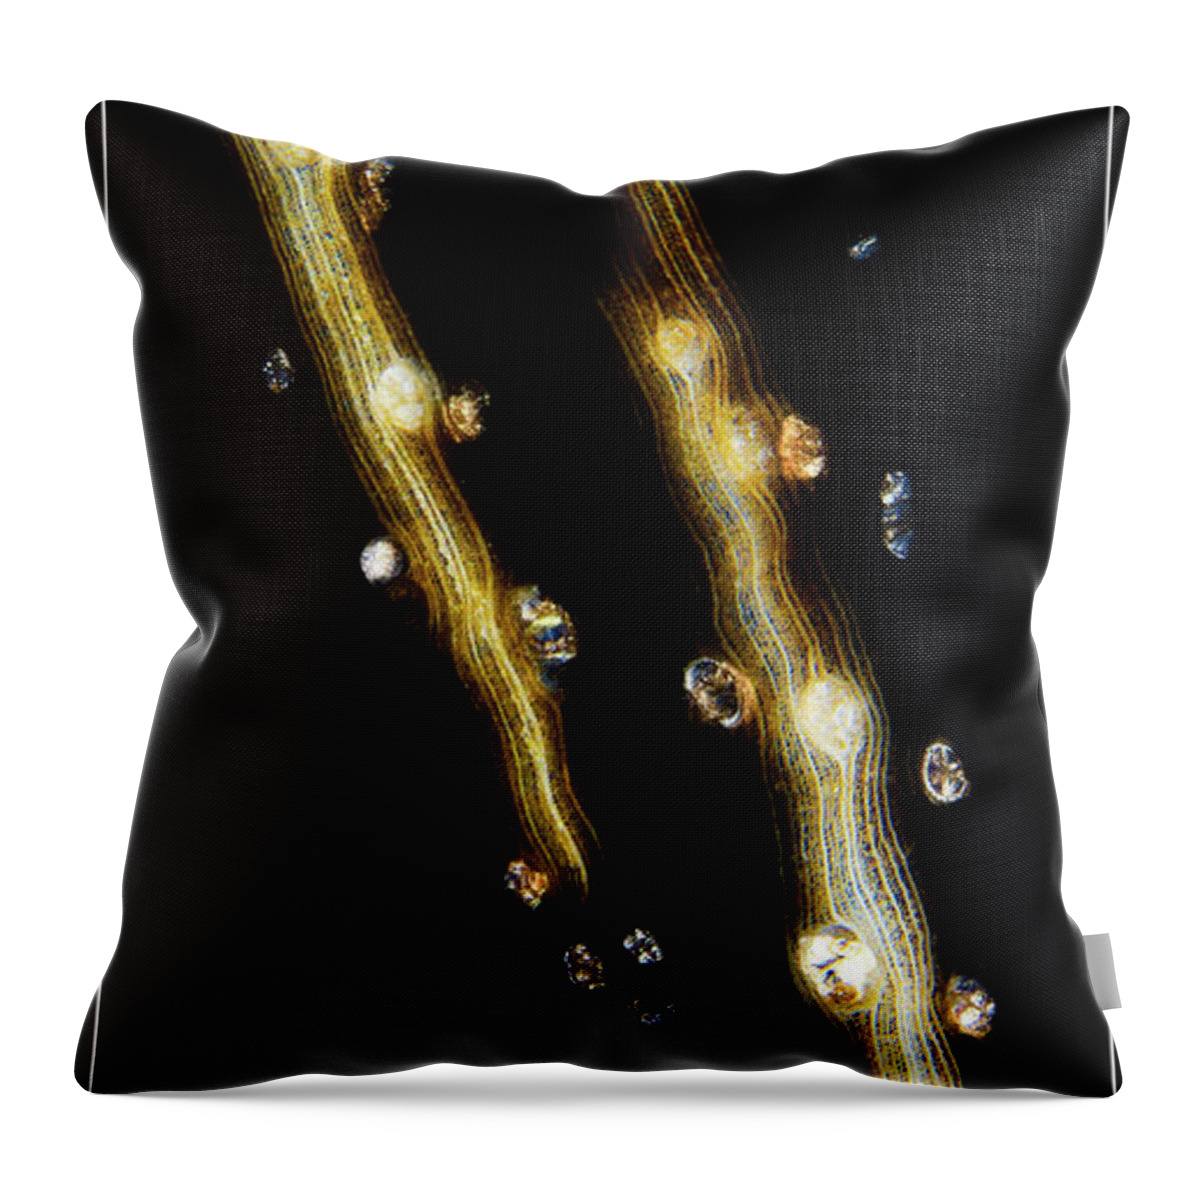 Fine Art Photography Throw Pillow featuring the photograph Cosmic Strands by John Strong